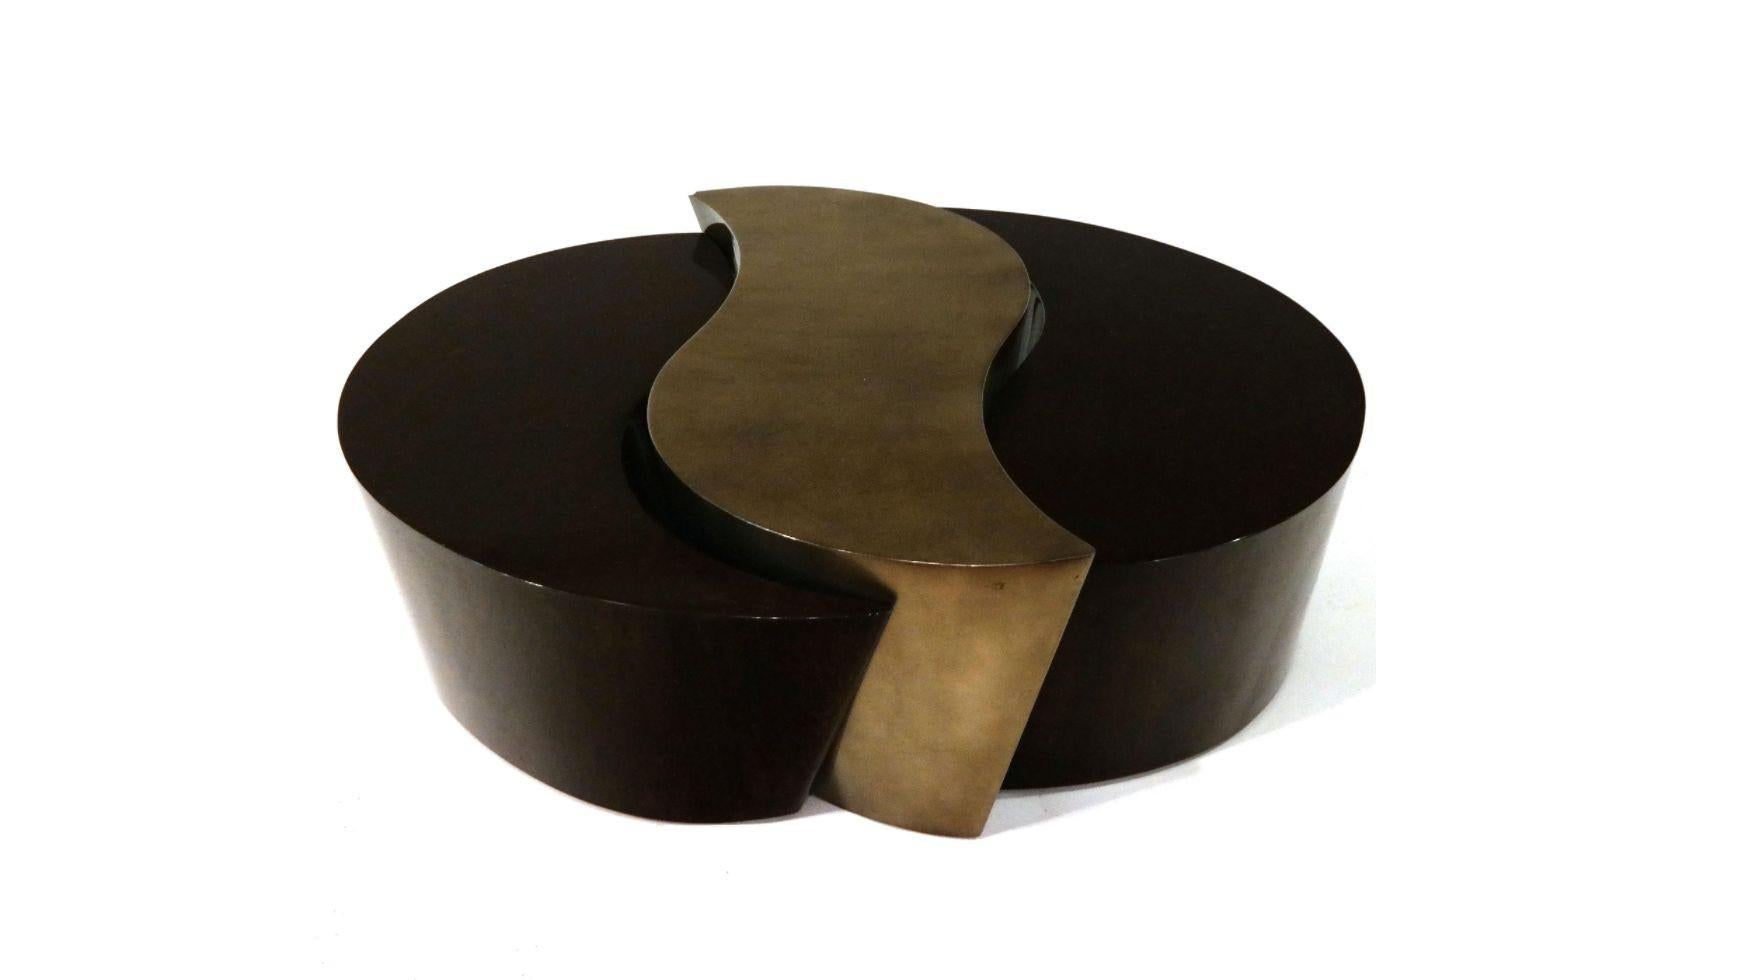 Contemporary biomorphic-style coffee/cocktail tables in three parts on castors with laminate design, by Jimeco.
Dimensions:
Overall: 18 1/2